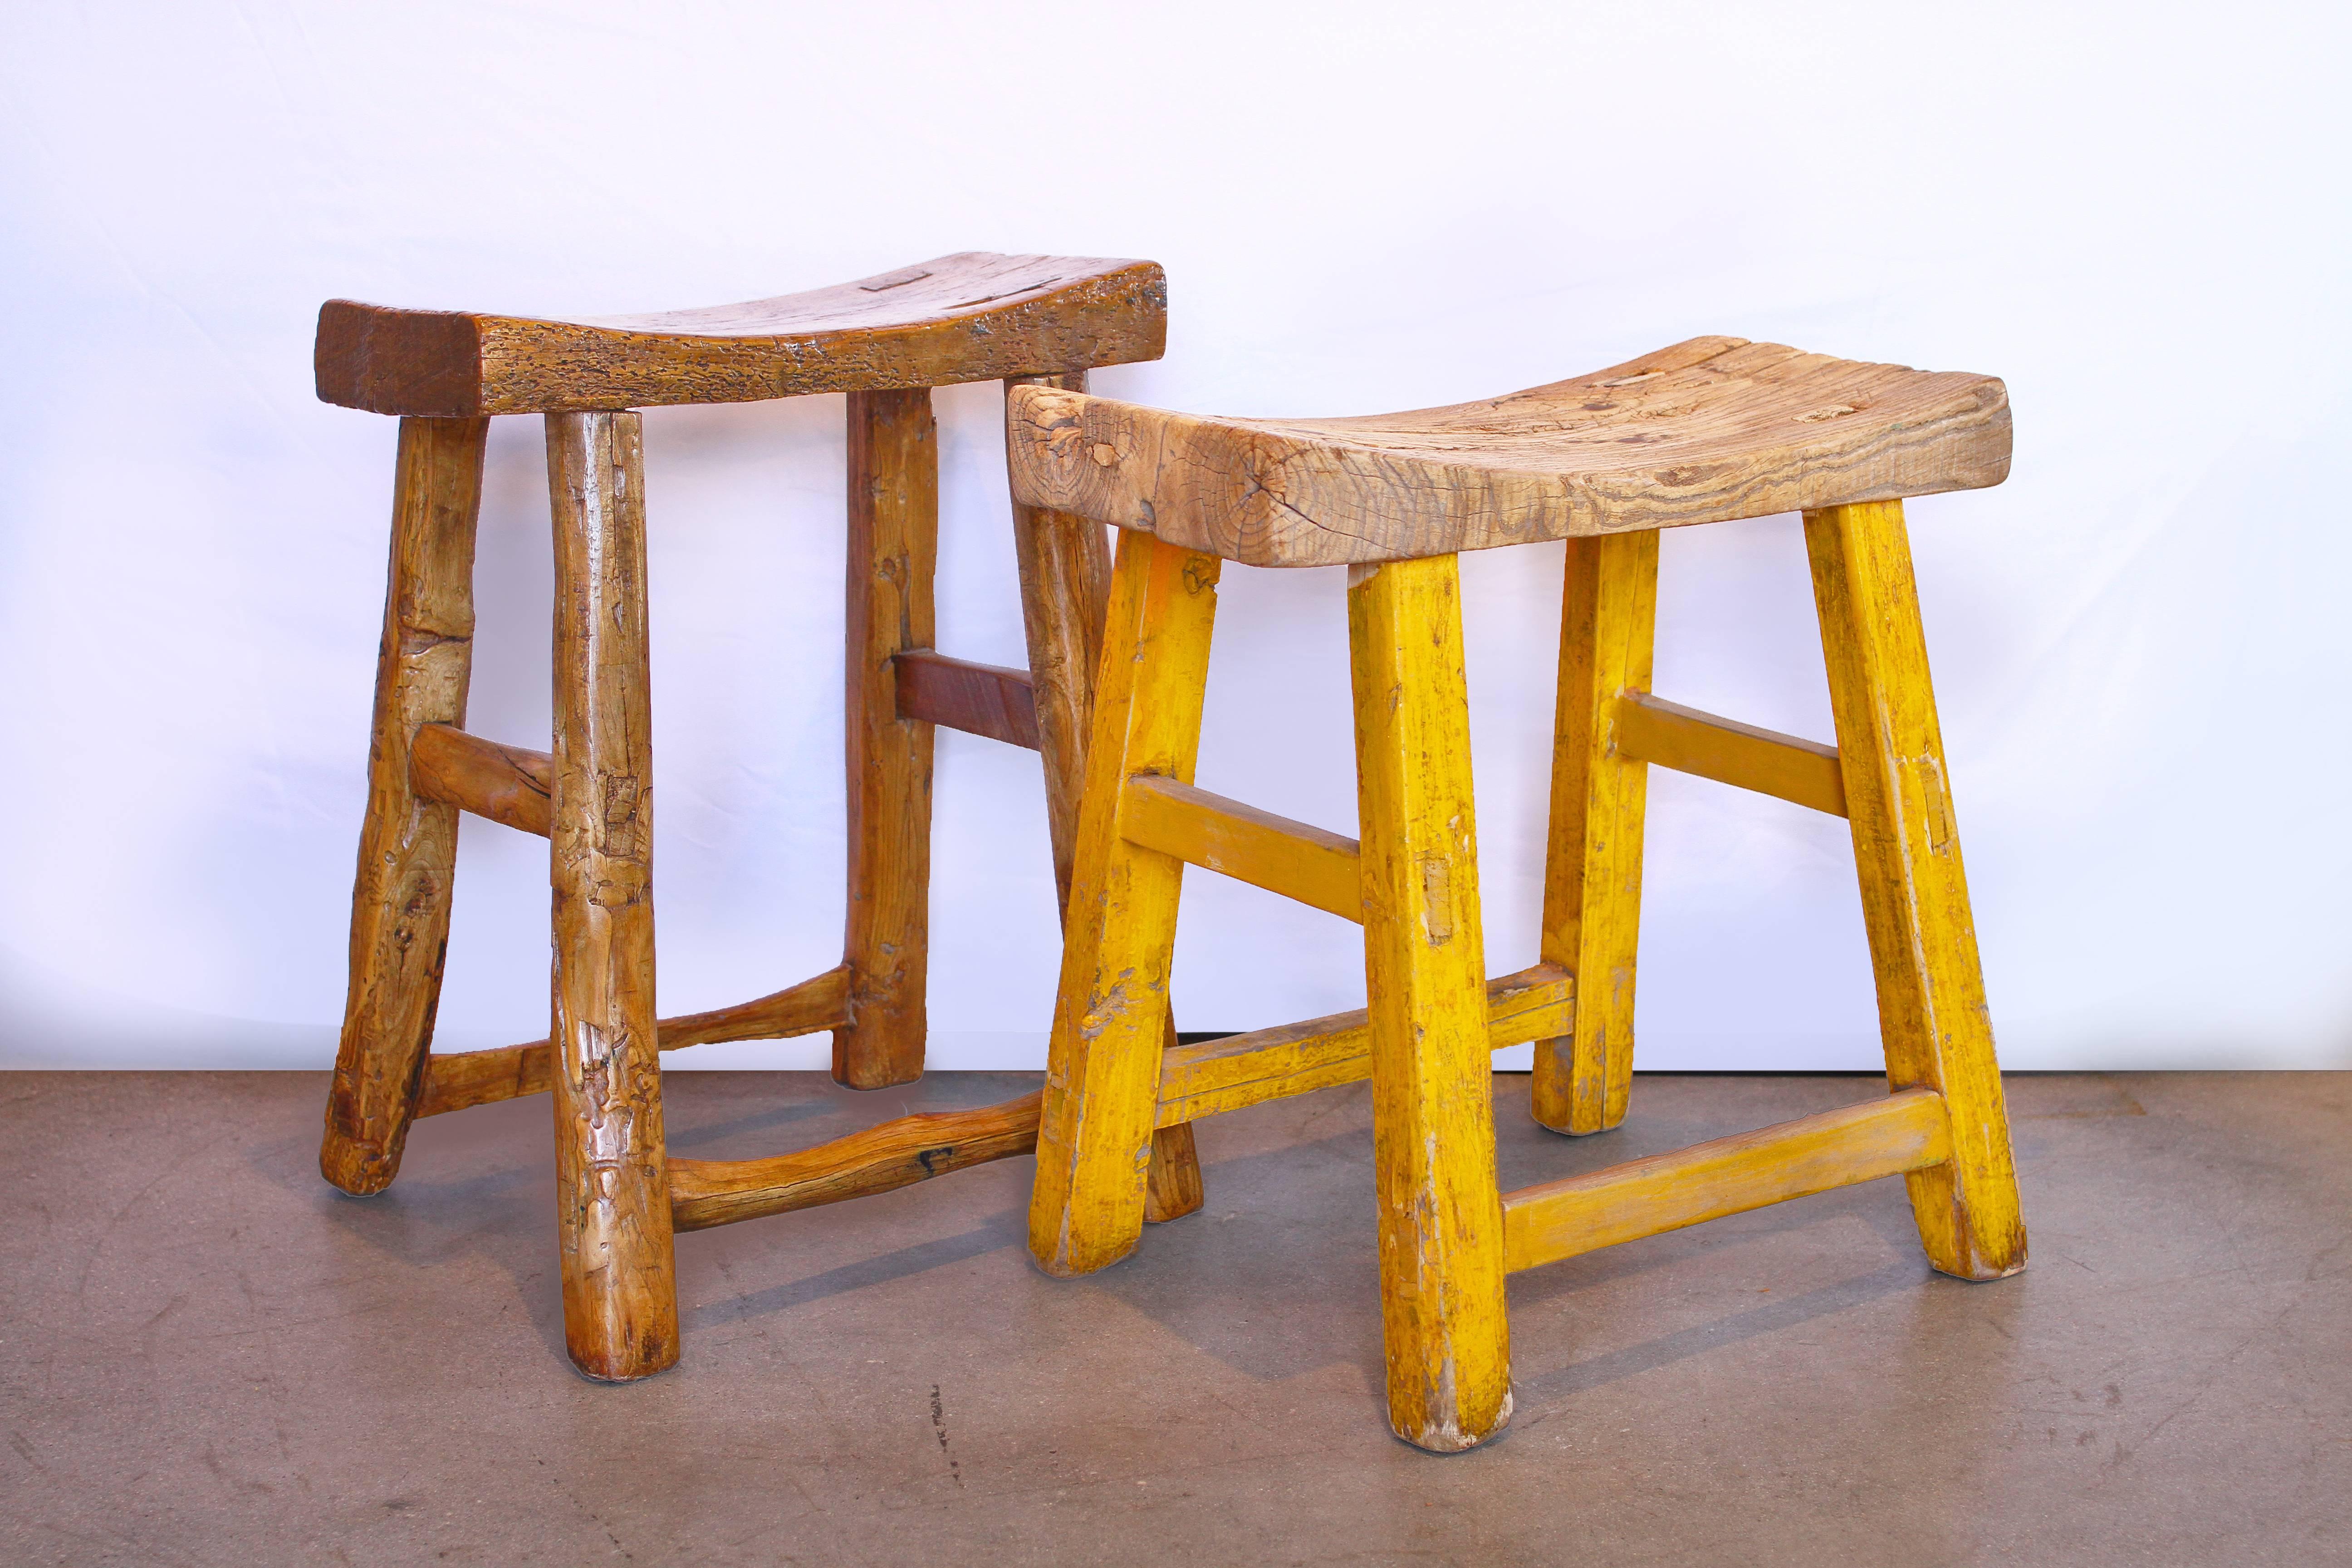 These antique saddle stools have a myriad of uses and give a sense of rustic charm to any decor. Definitely on the list of 